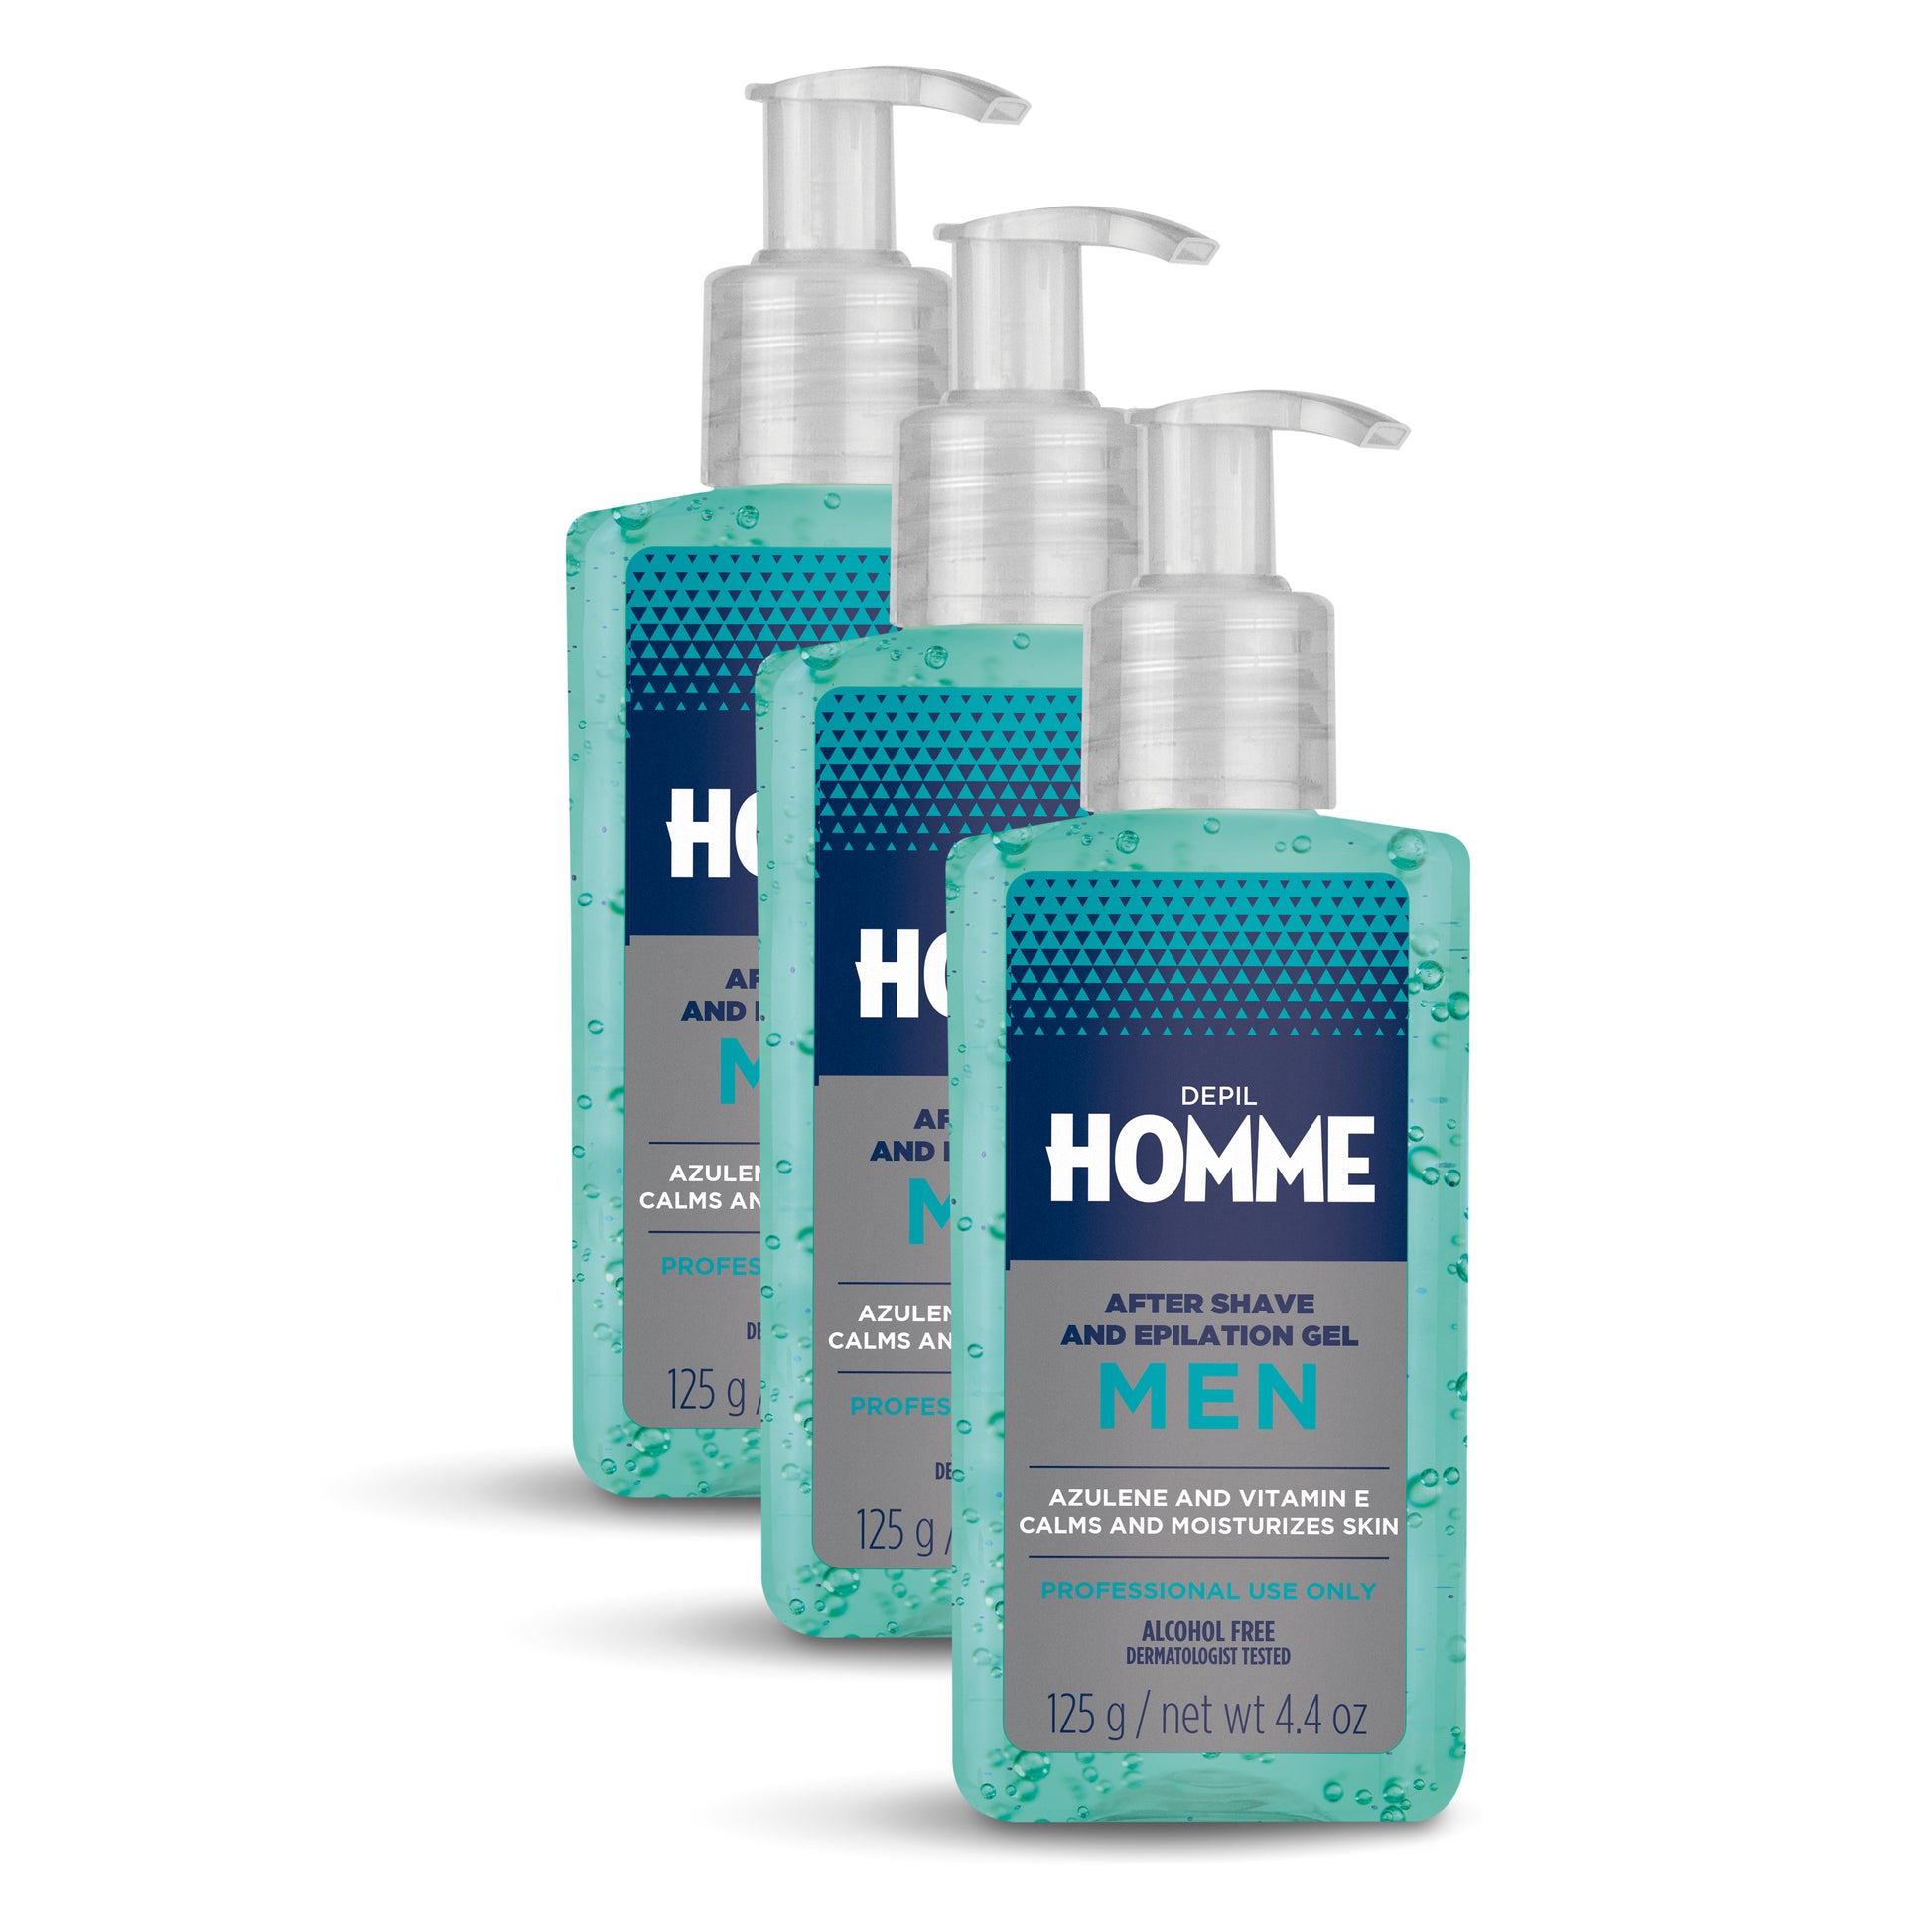 Depil Homme by Depil Bella After Shave and Waxing Gel 125g (3 Units Offer) - Depilcompany